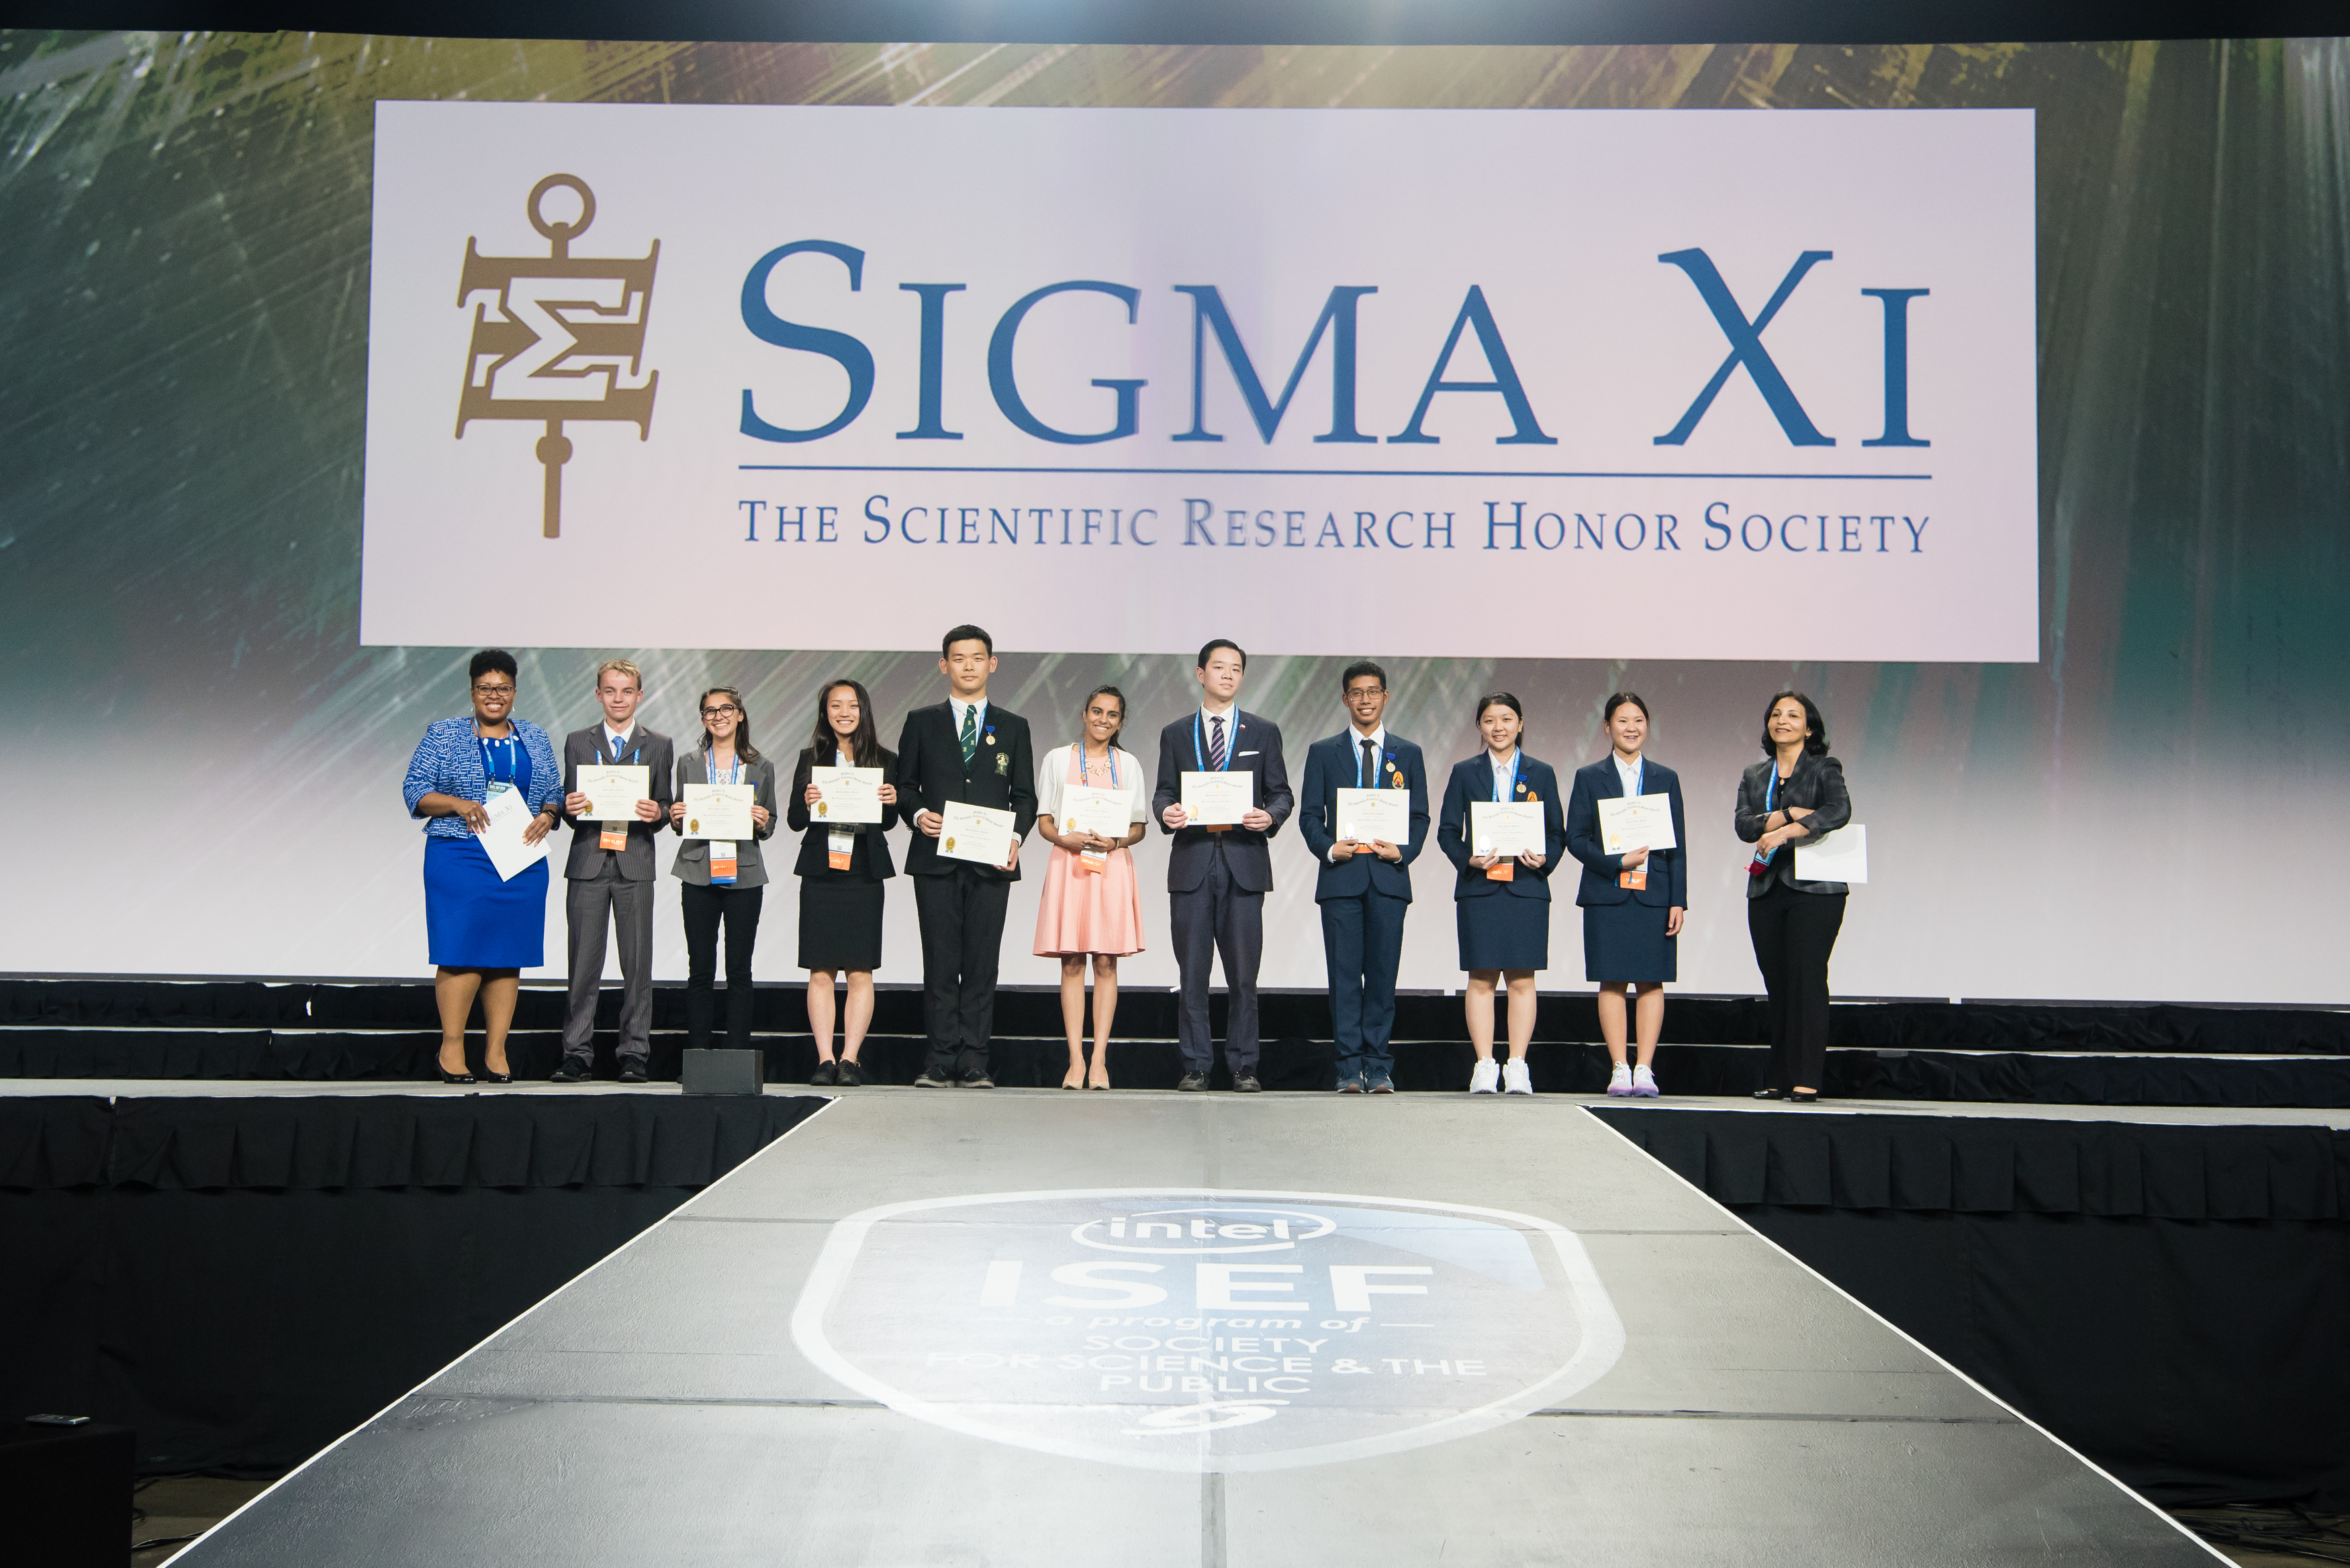 Sigma Xi, The Scientific Research Honor Society | Student Science3500 x 2336